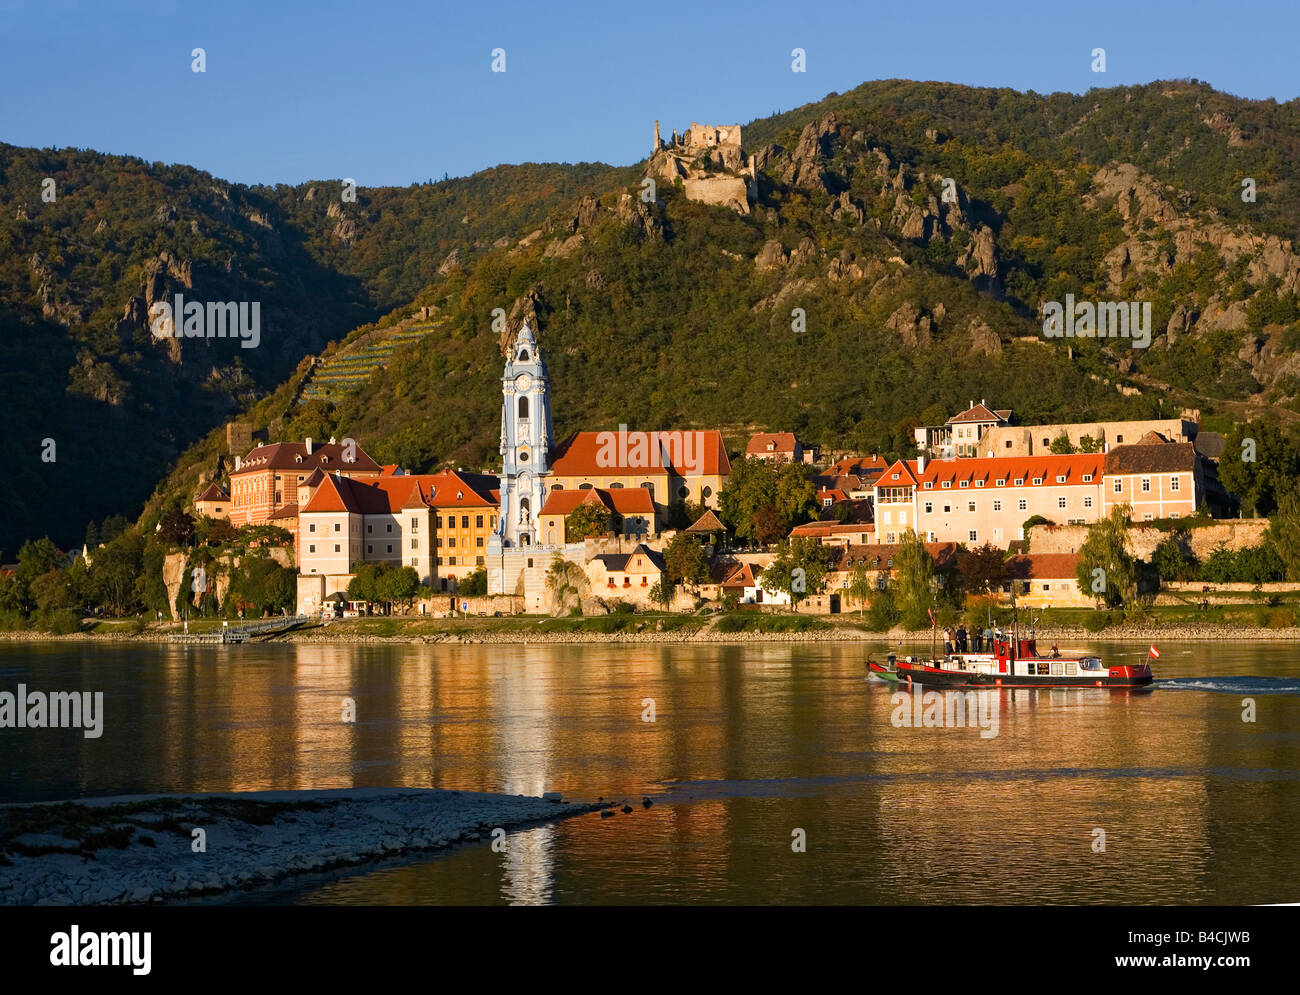 Durstein Blue Church and Castle on Danube River in Austria Stock Photo